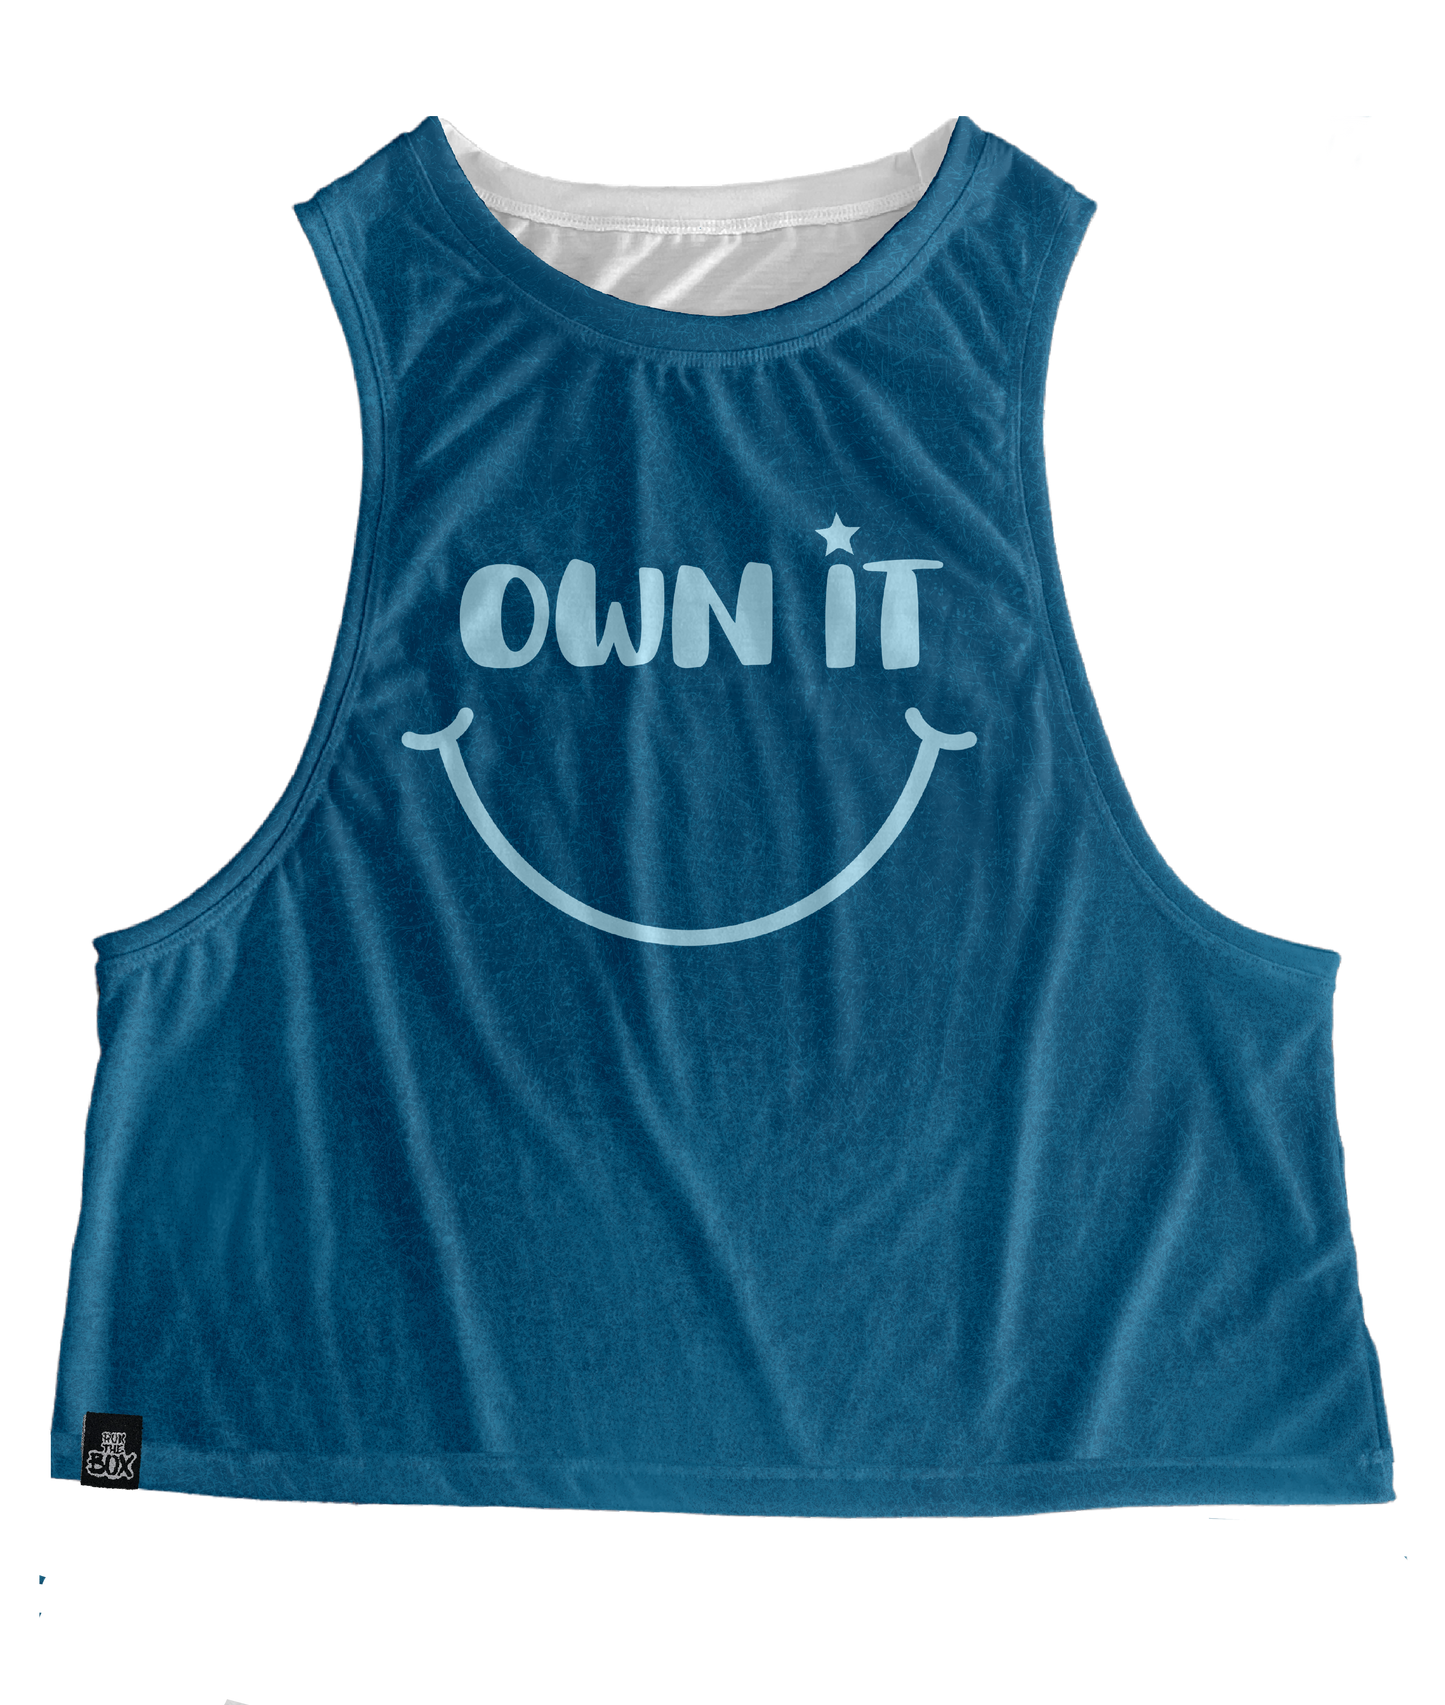 OWN IT (Teal) Tops